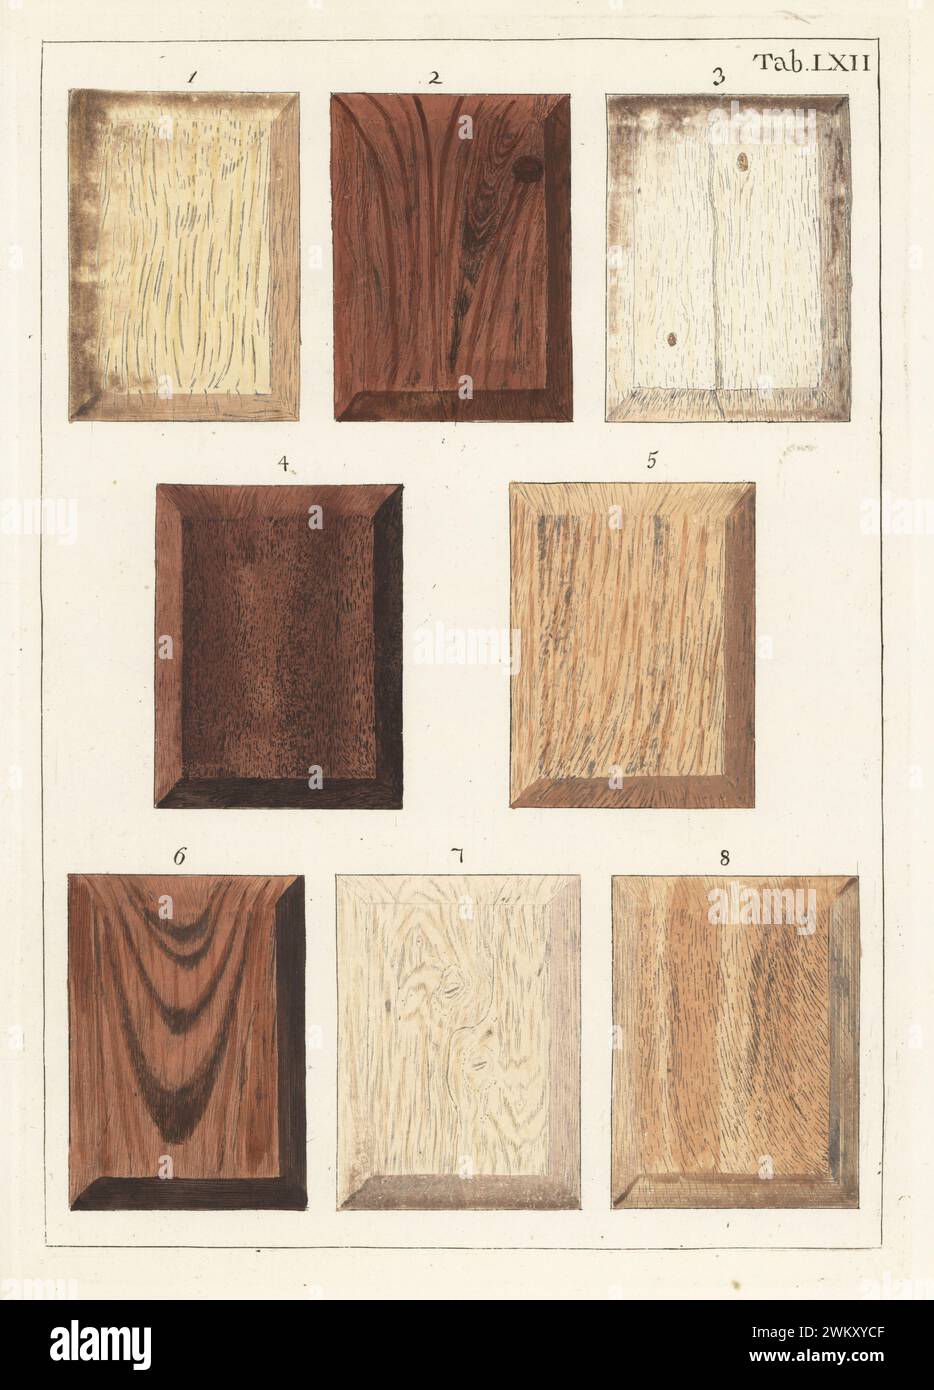 Simaroube wood 1, bimittie or ballaba wood 2, datura wood 3, boerewa wood 4, coemarre marre or marmelade wood 5, itoerie ballaba wood 6, wild fig tree wood 7 and oelo wood 8. Handcoloured copperplate engraving by Jan Christian Sepp from Martinus Houttuyn’s Icones Lignorum exoticorum et nostratium: Wood Science, Representations of Native and Exotic Woods, J.C. Sepp, Amsterdam, Holland, 1773. Stock Photo